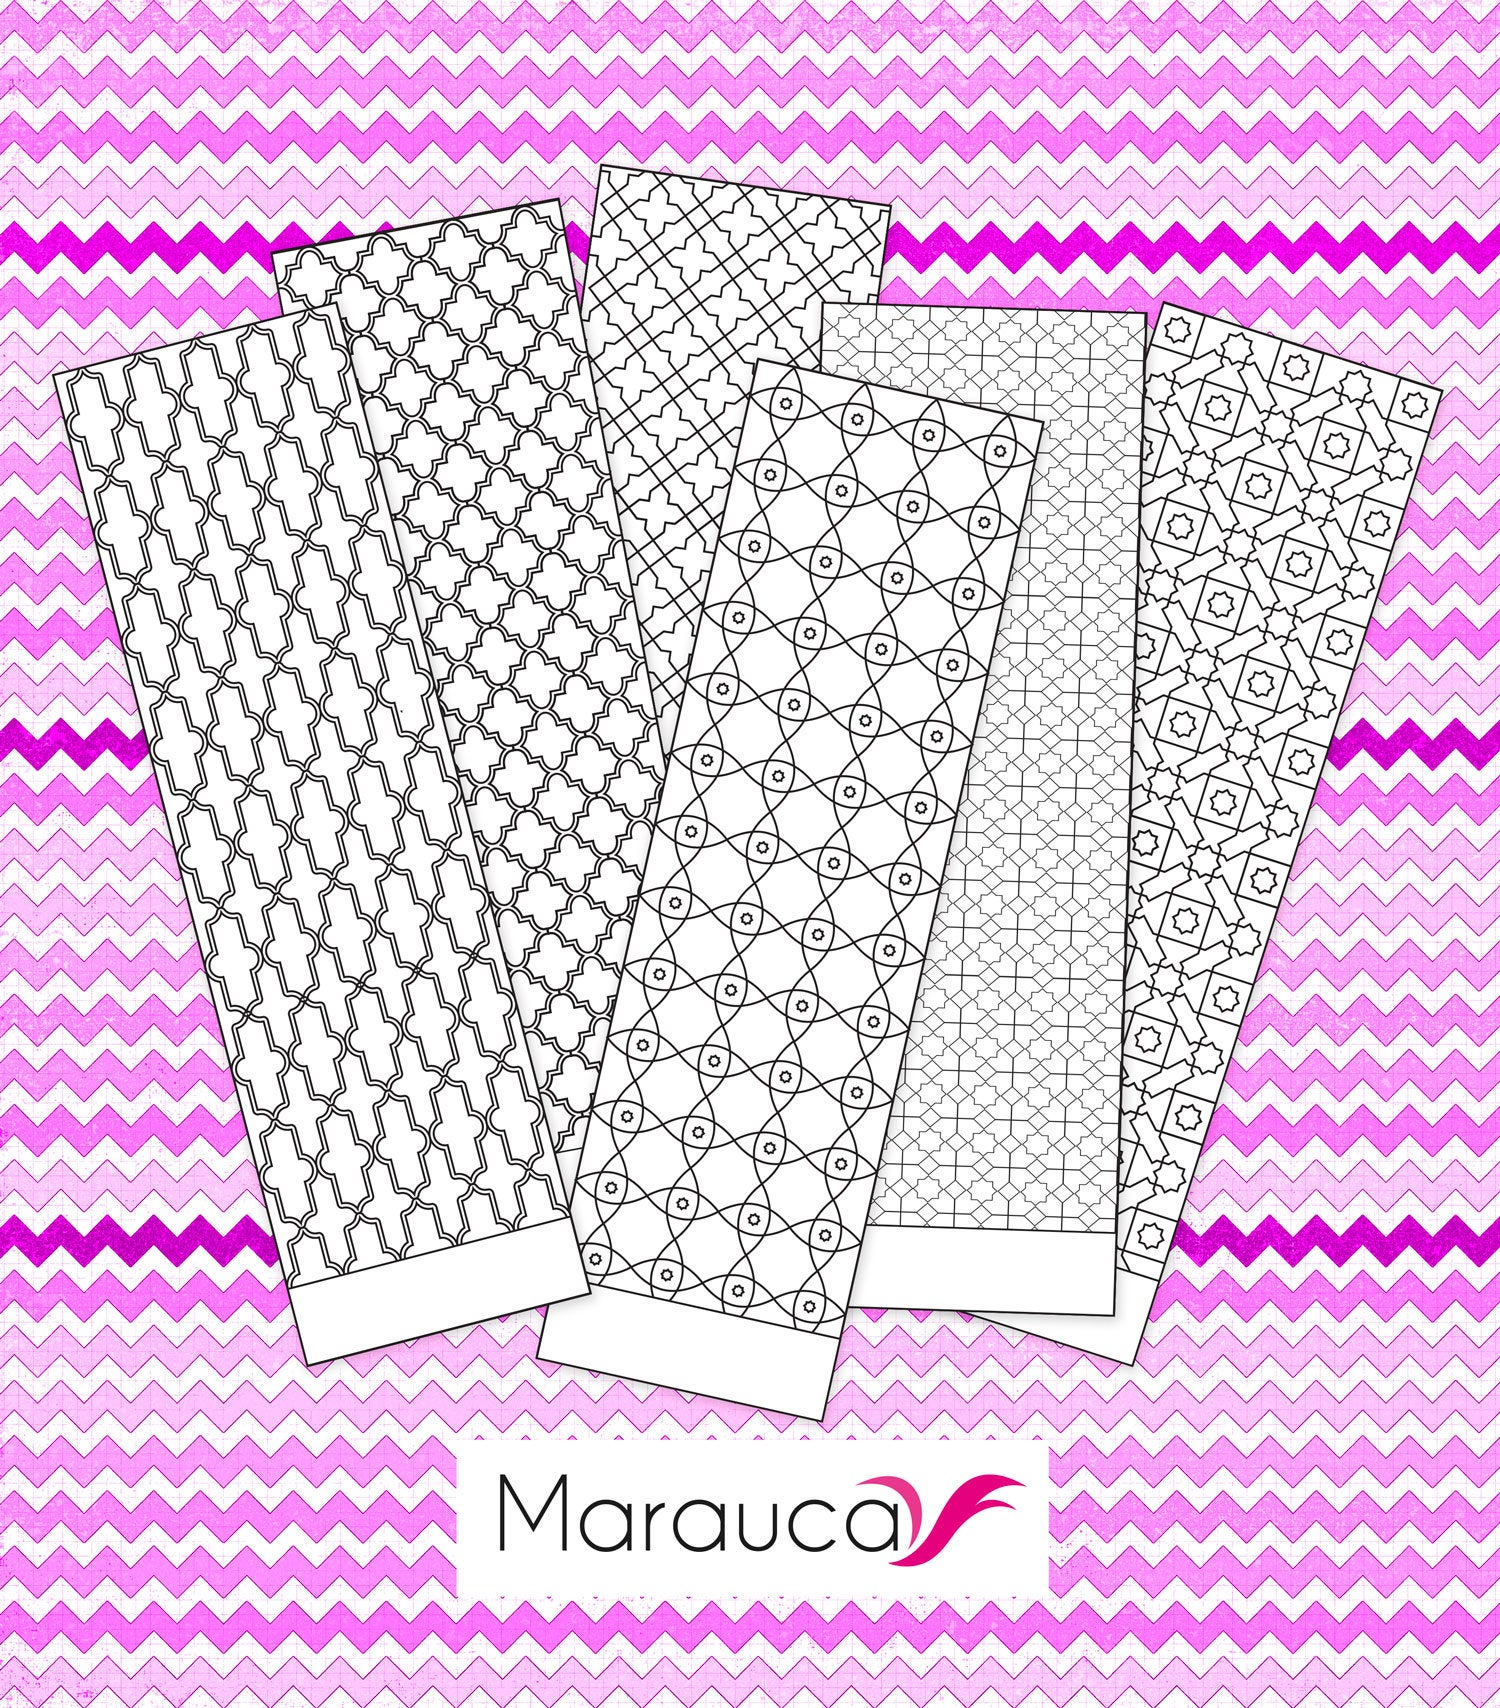 Morocco Coloring Pages 6 Bookmarks Coloring Pages Printable Moroccan Mosaic Islamic Art Arabic Mosaic Coloring Bookmark Mosaic Tile Morocco Illustration